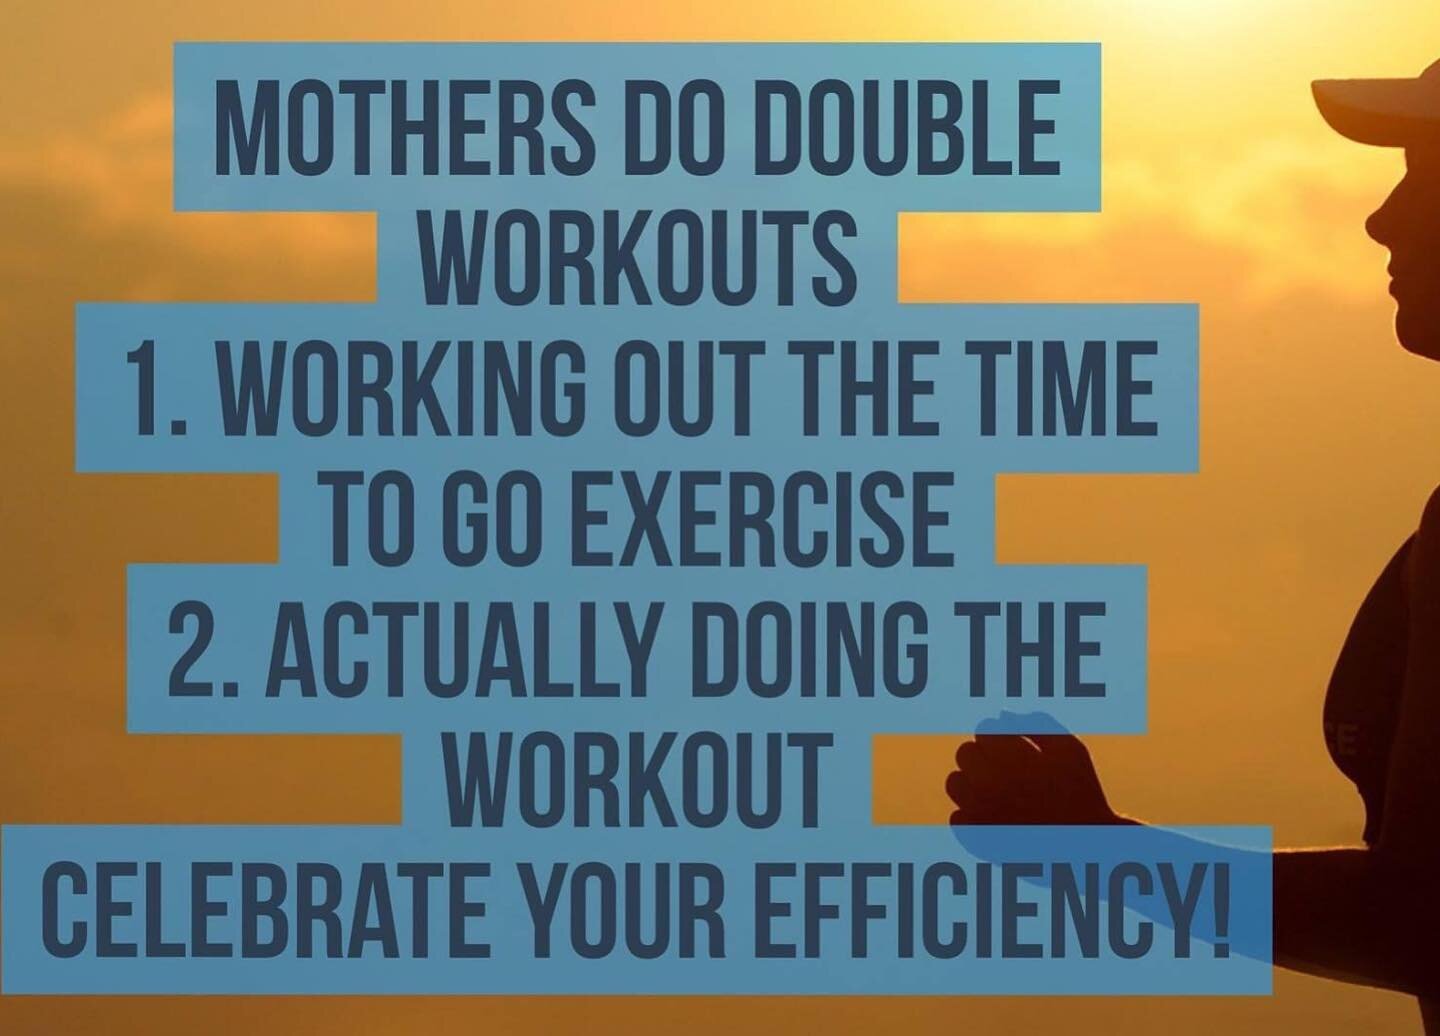 Hope all my mothers, mothers-to-be and mothers who are supporting their partners as they focus on their health and fitness has a great day yesterday. #mothersday #strongwomen #celebratewomen #fitwomen